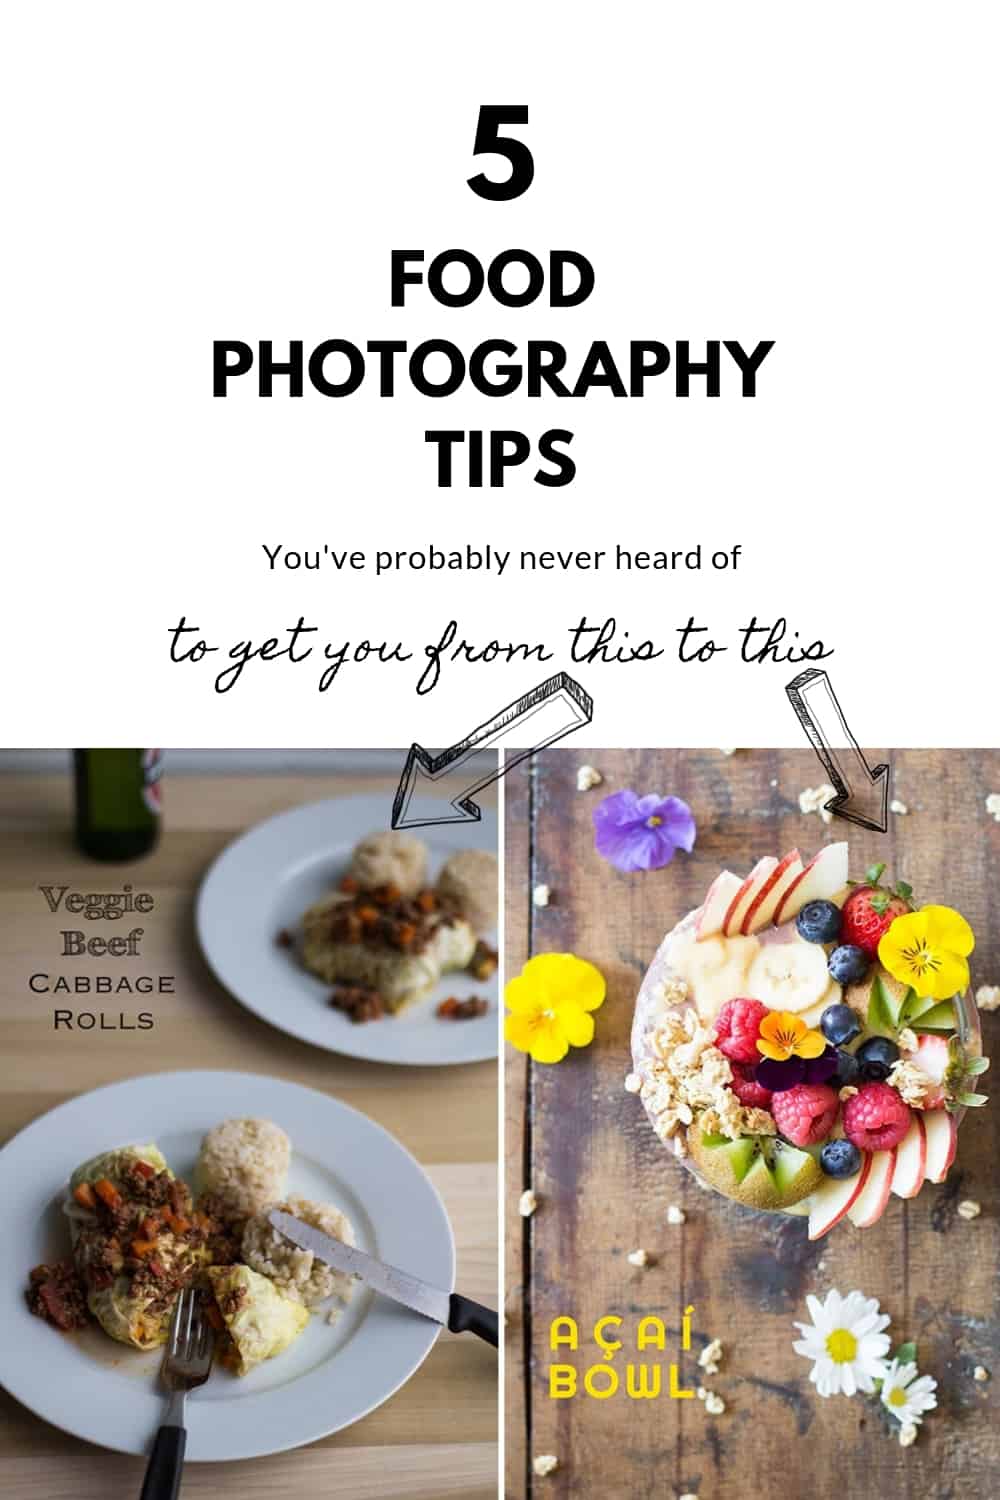 Food Photography Tips Collage